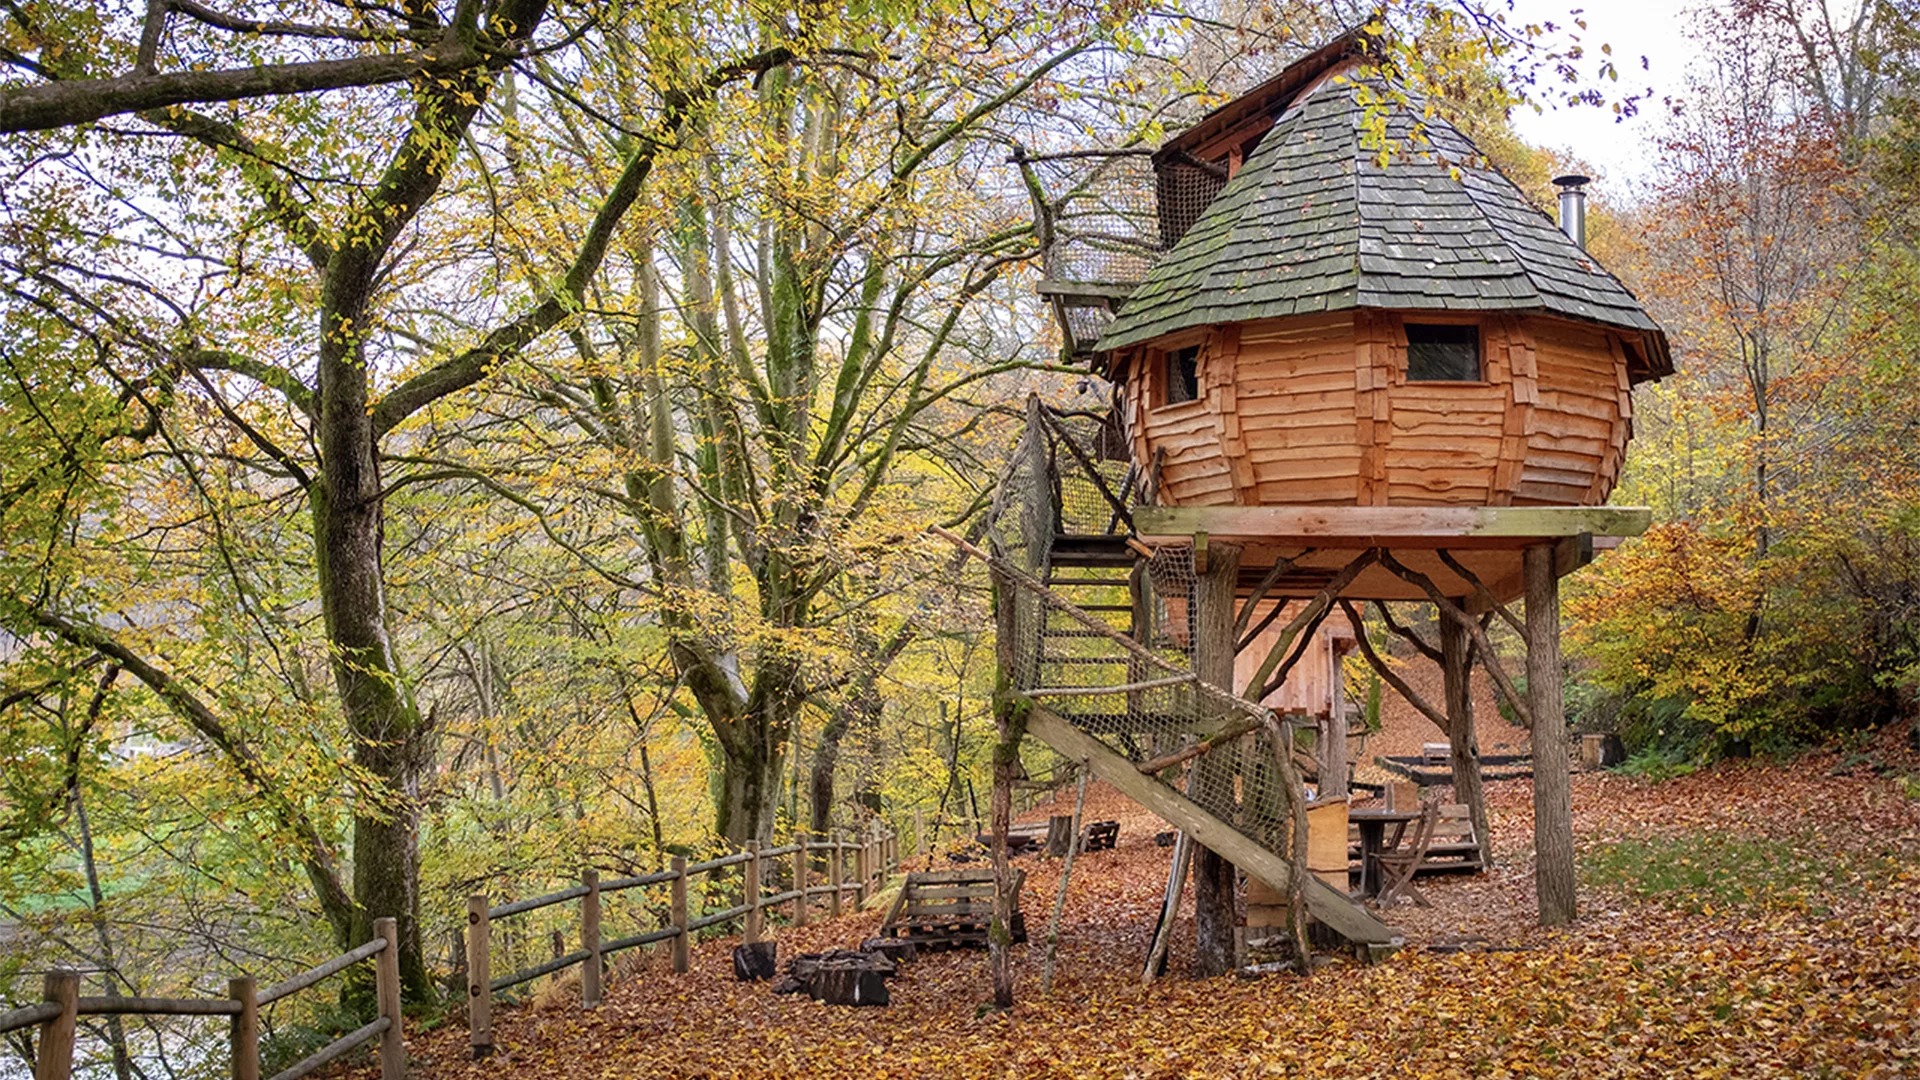 Cute wooden treehouse